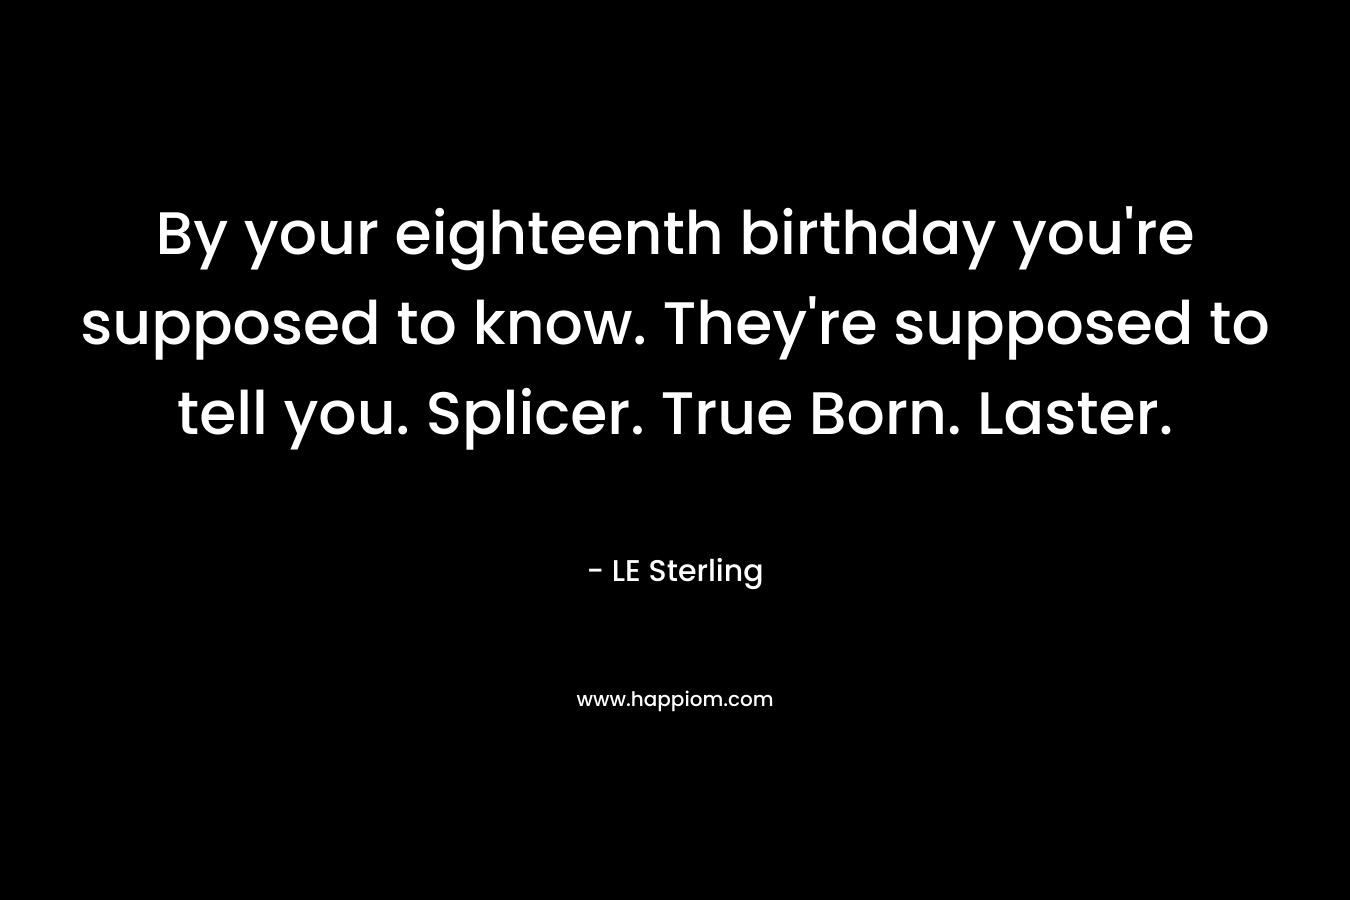 By your eighteenth birthday you’re supposed to know. They’re supposed to tell you. Splicer. True Born. Laster. – LE Sterling